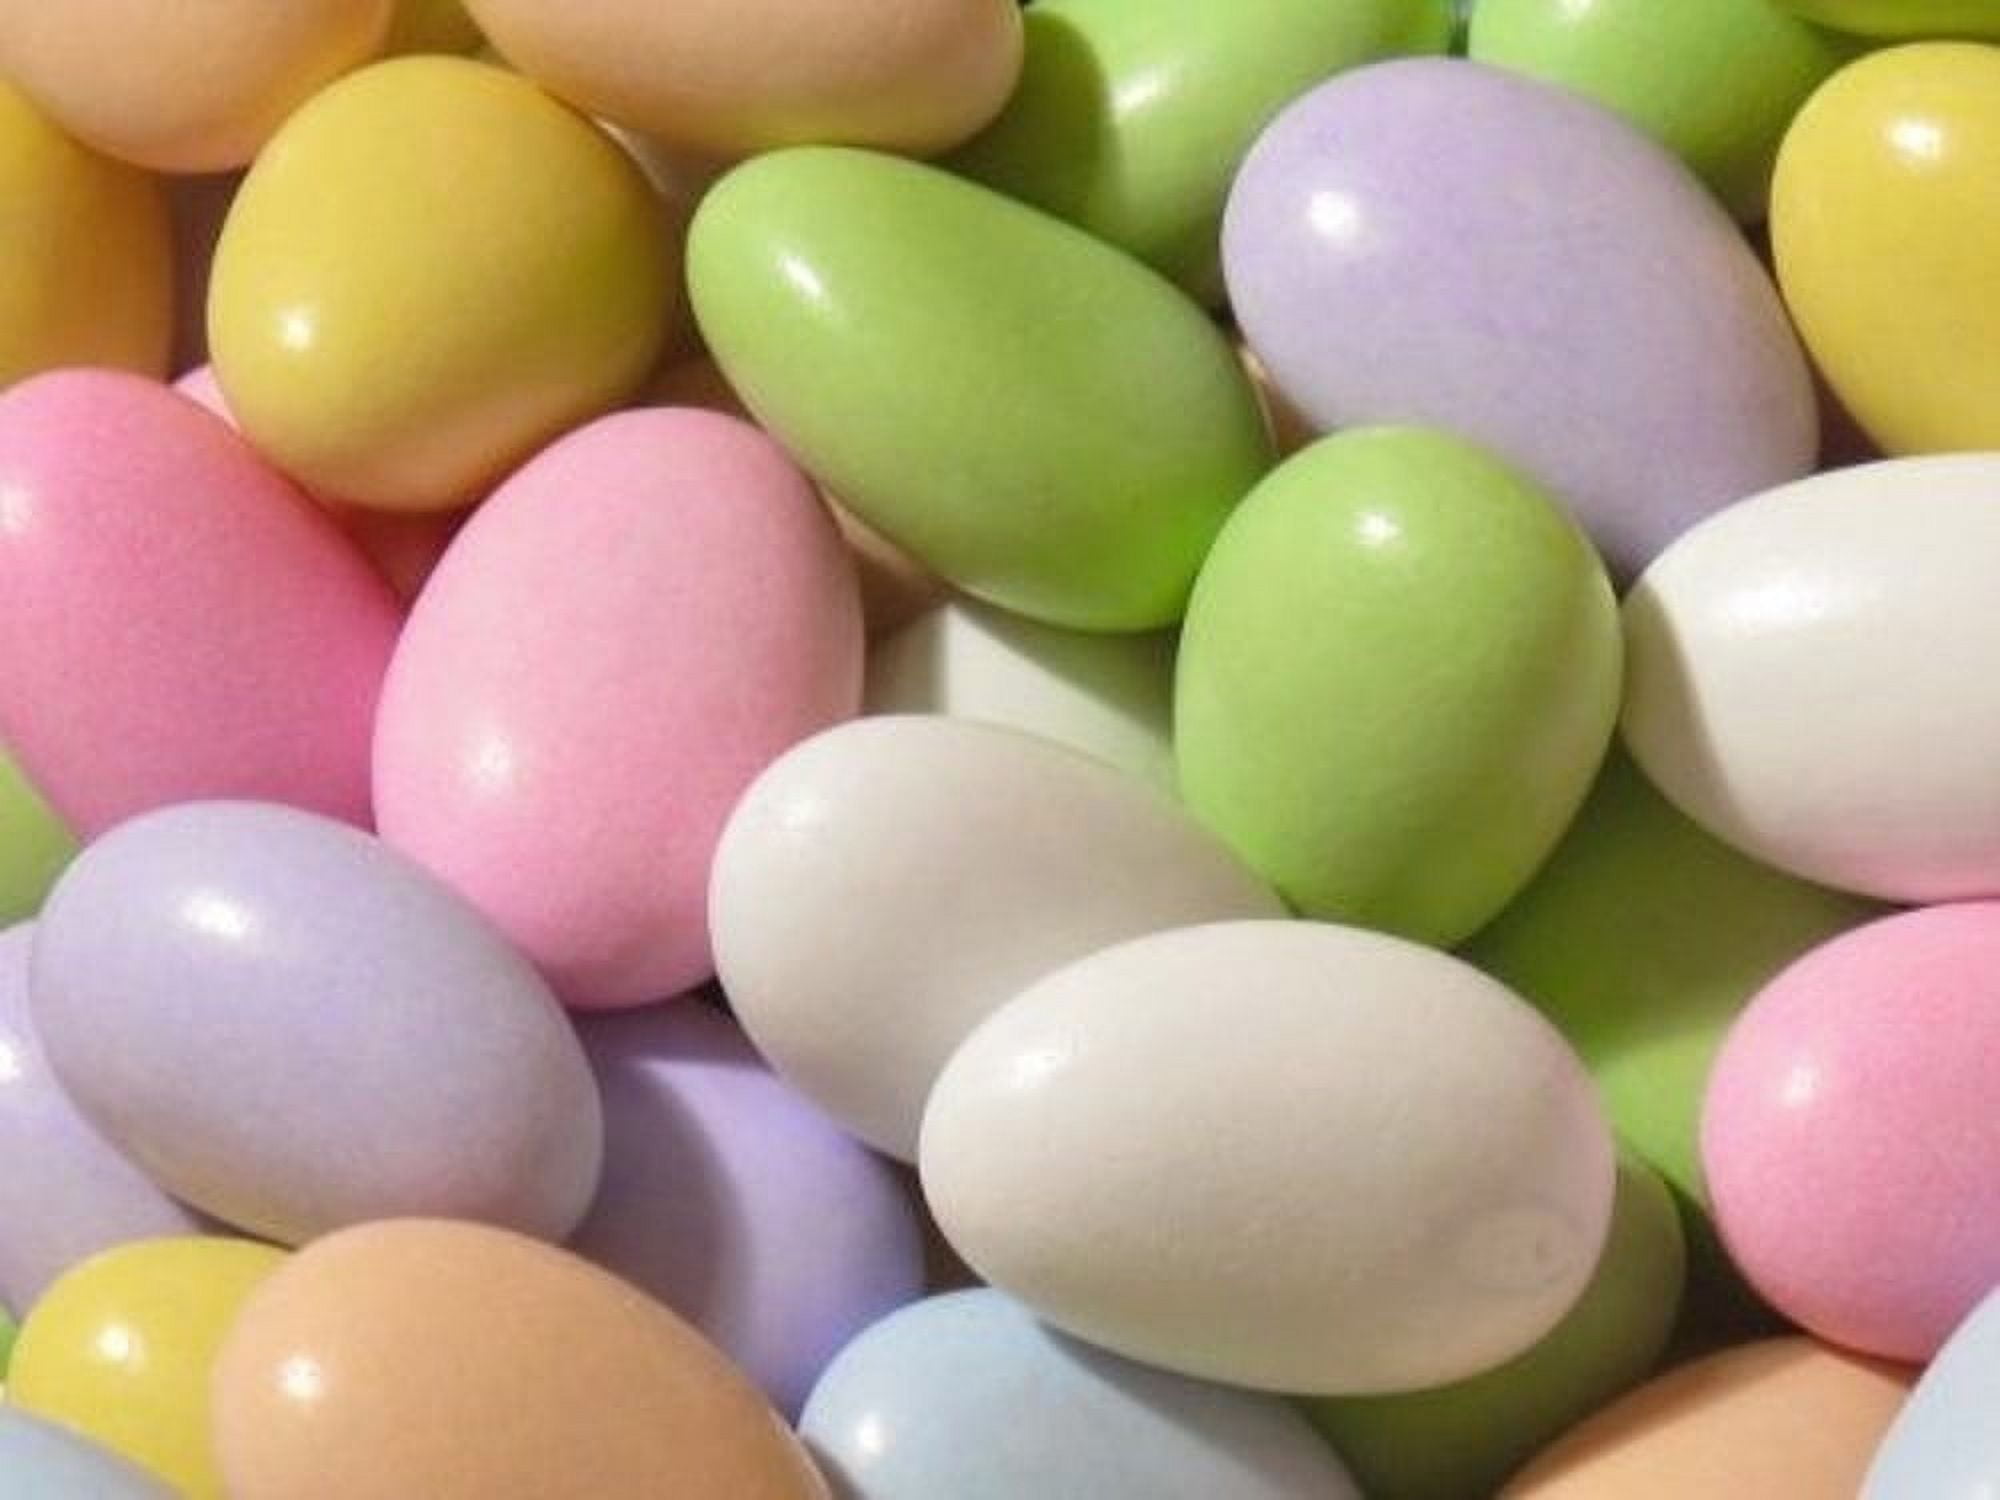 Cambie Jordan Almonds, Pastel Candy Almonds in Assorted Colors, Premium  Roasted Almonds with a Sweet Sugar Coating